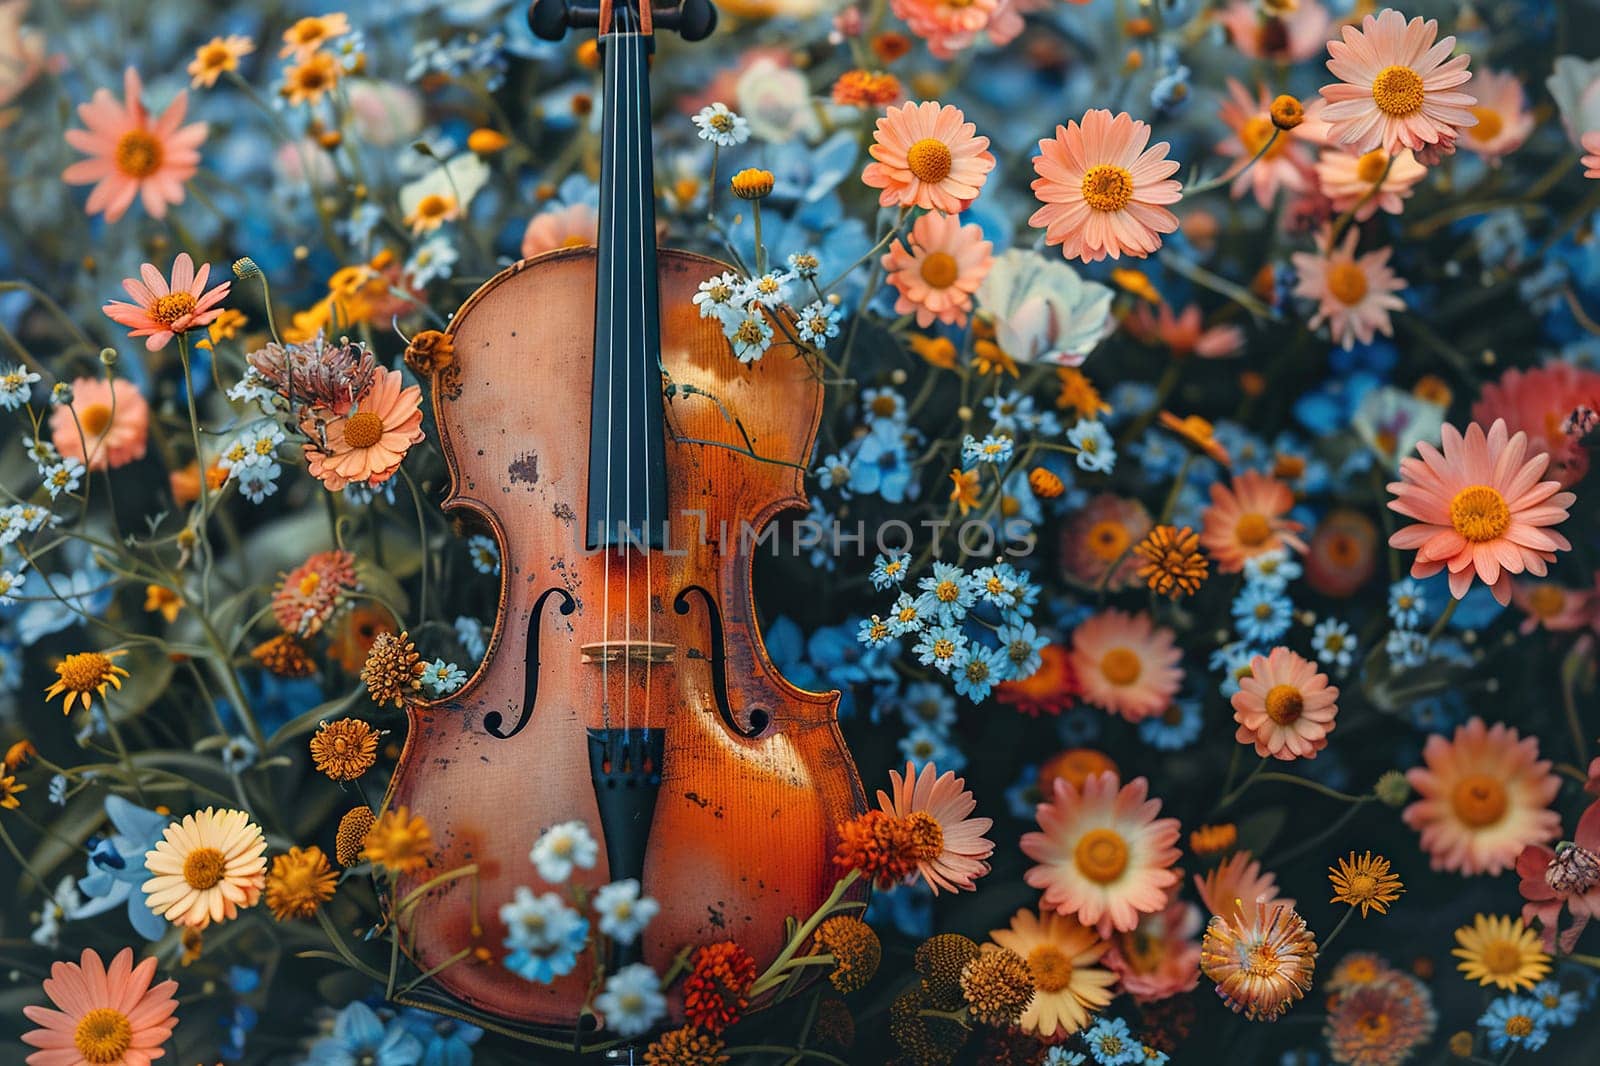 Vintage violin in a sea of flowers. Musical art beauty concept.